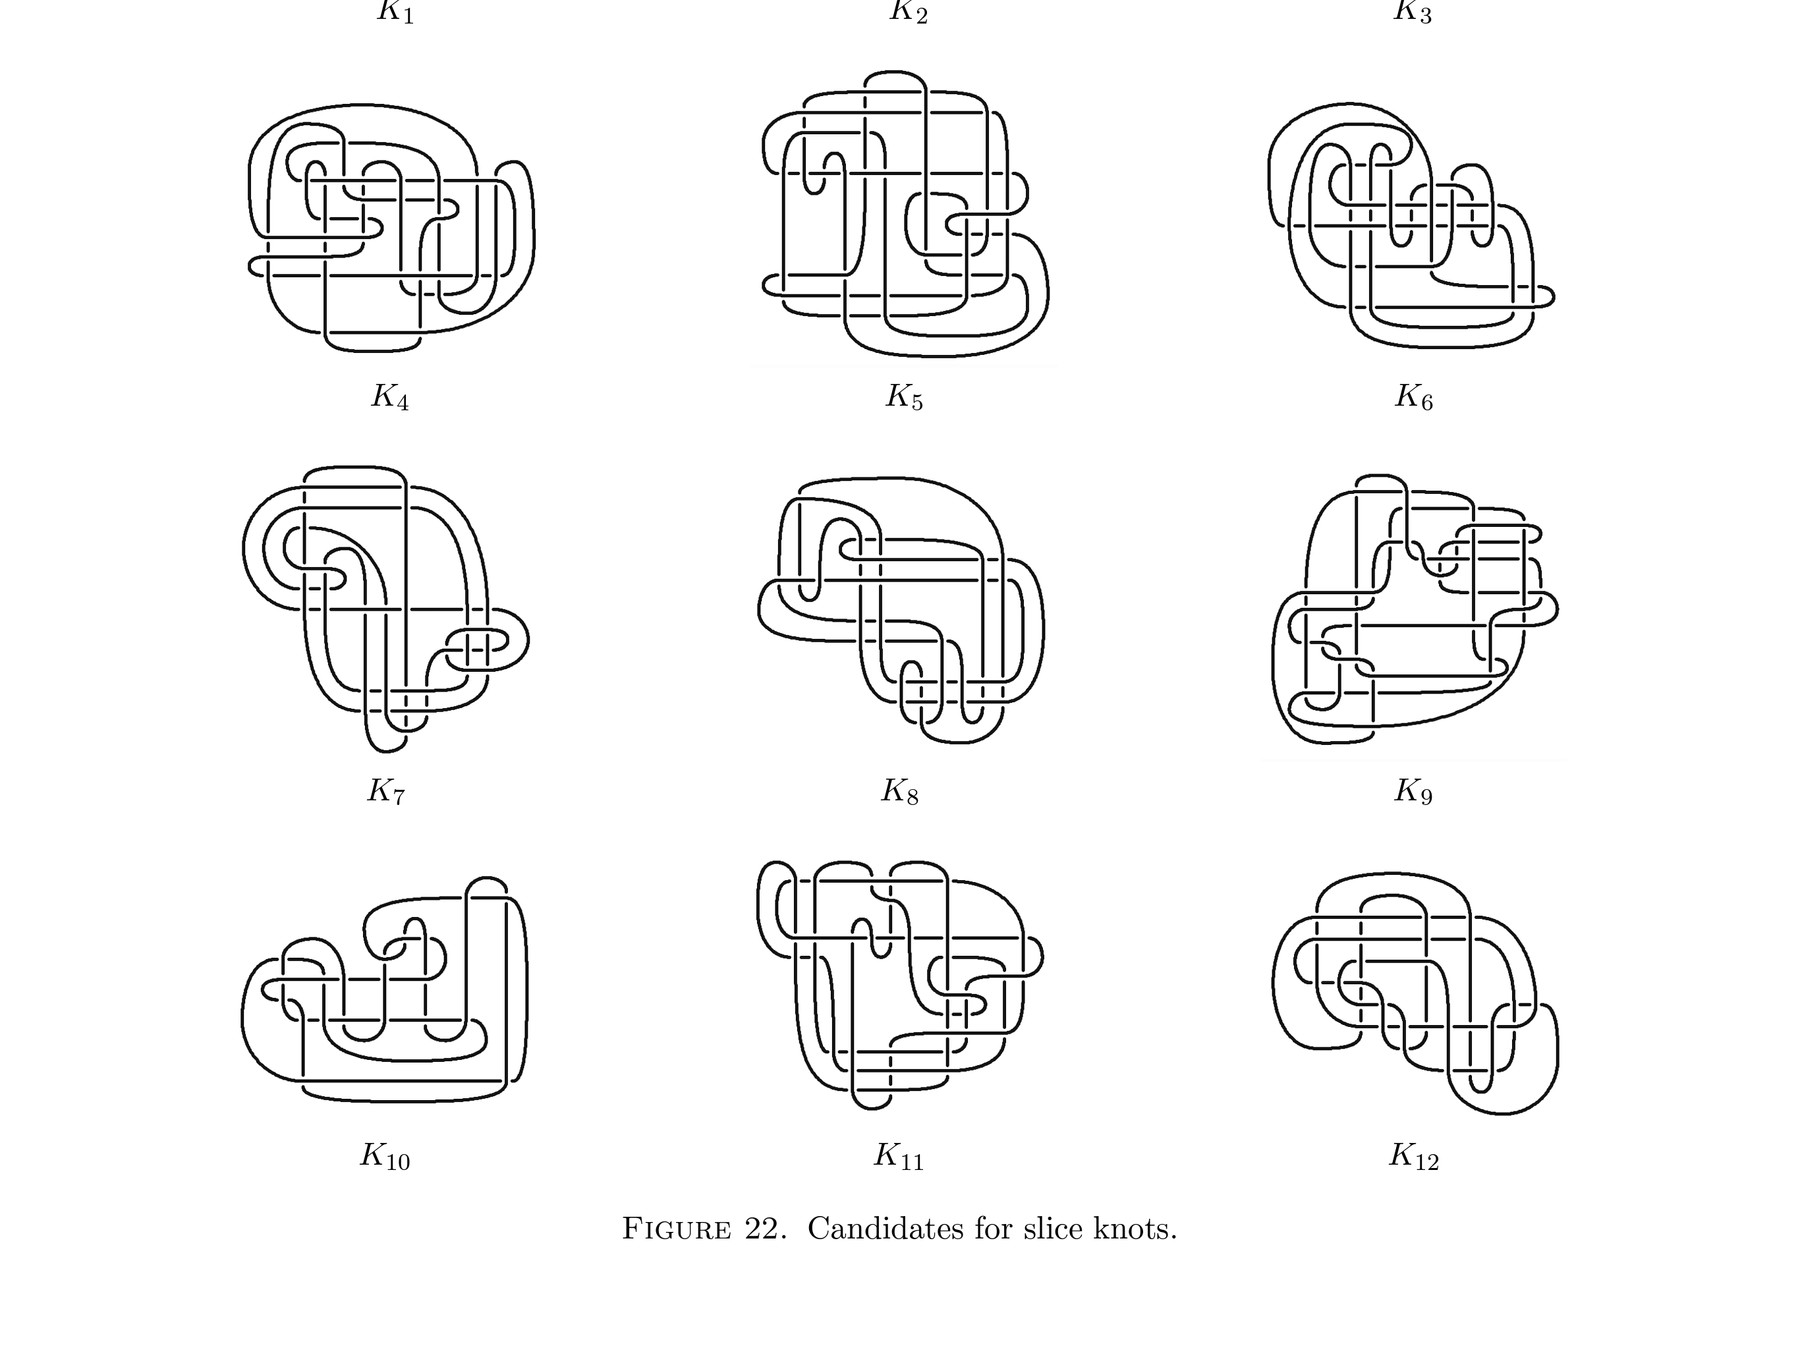 Figure 22. Candidates for slice knots.